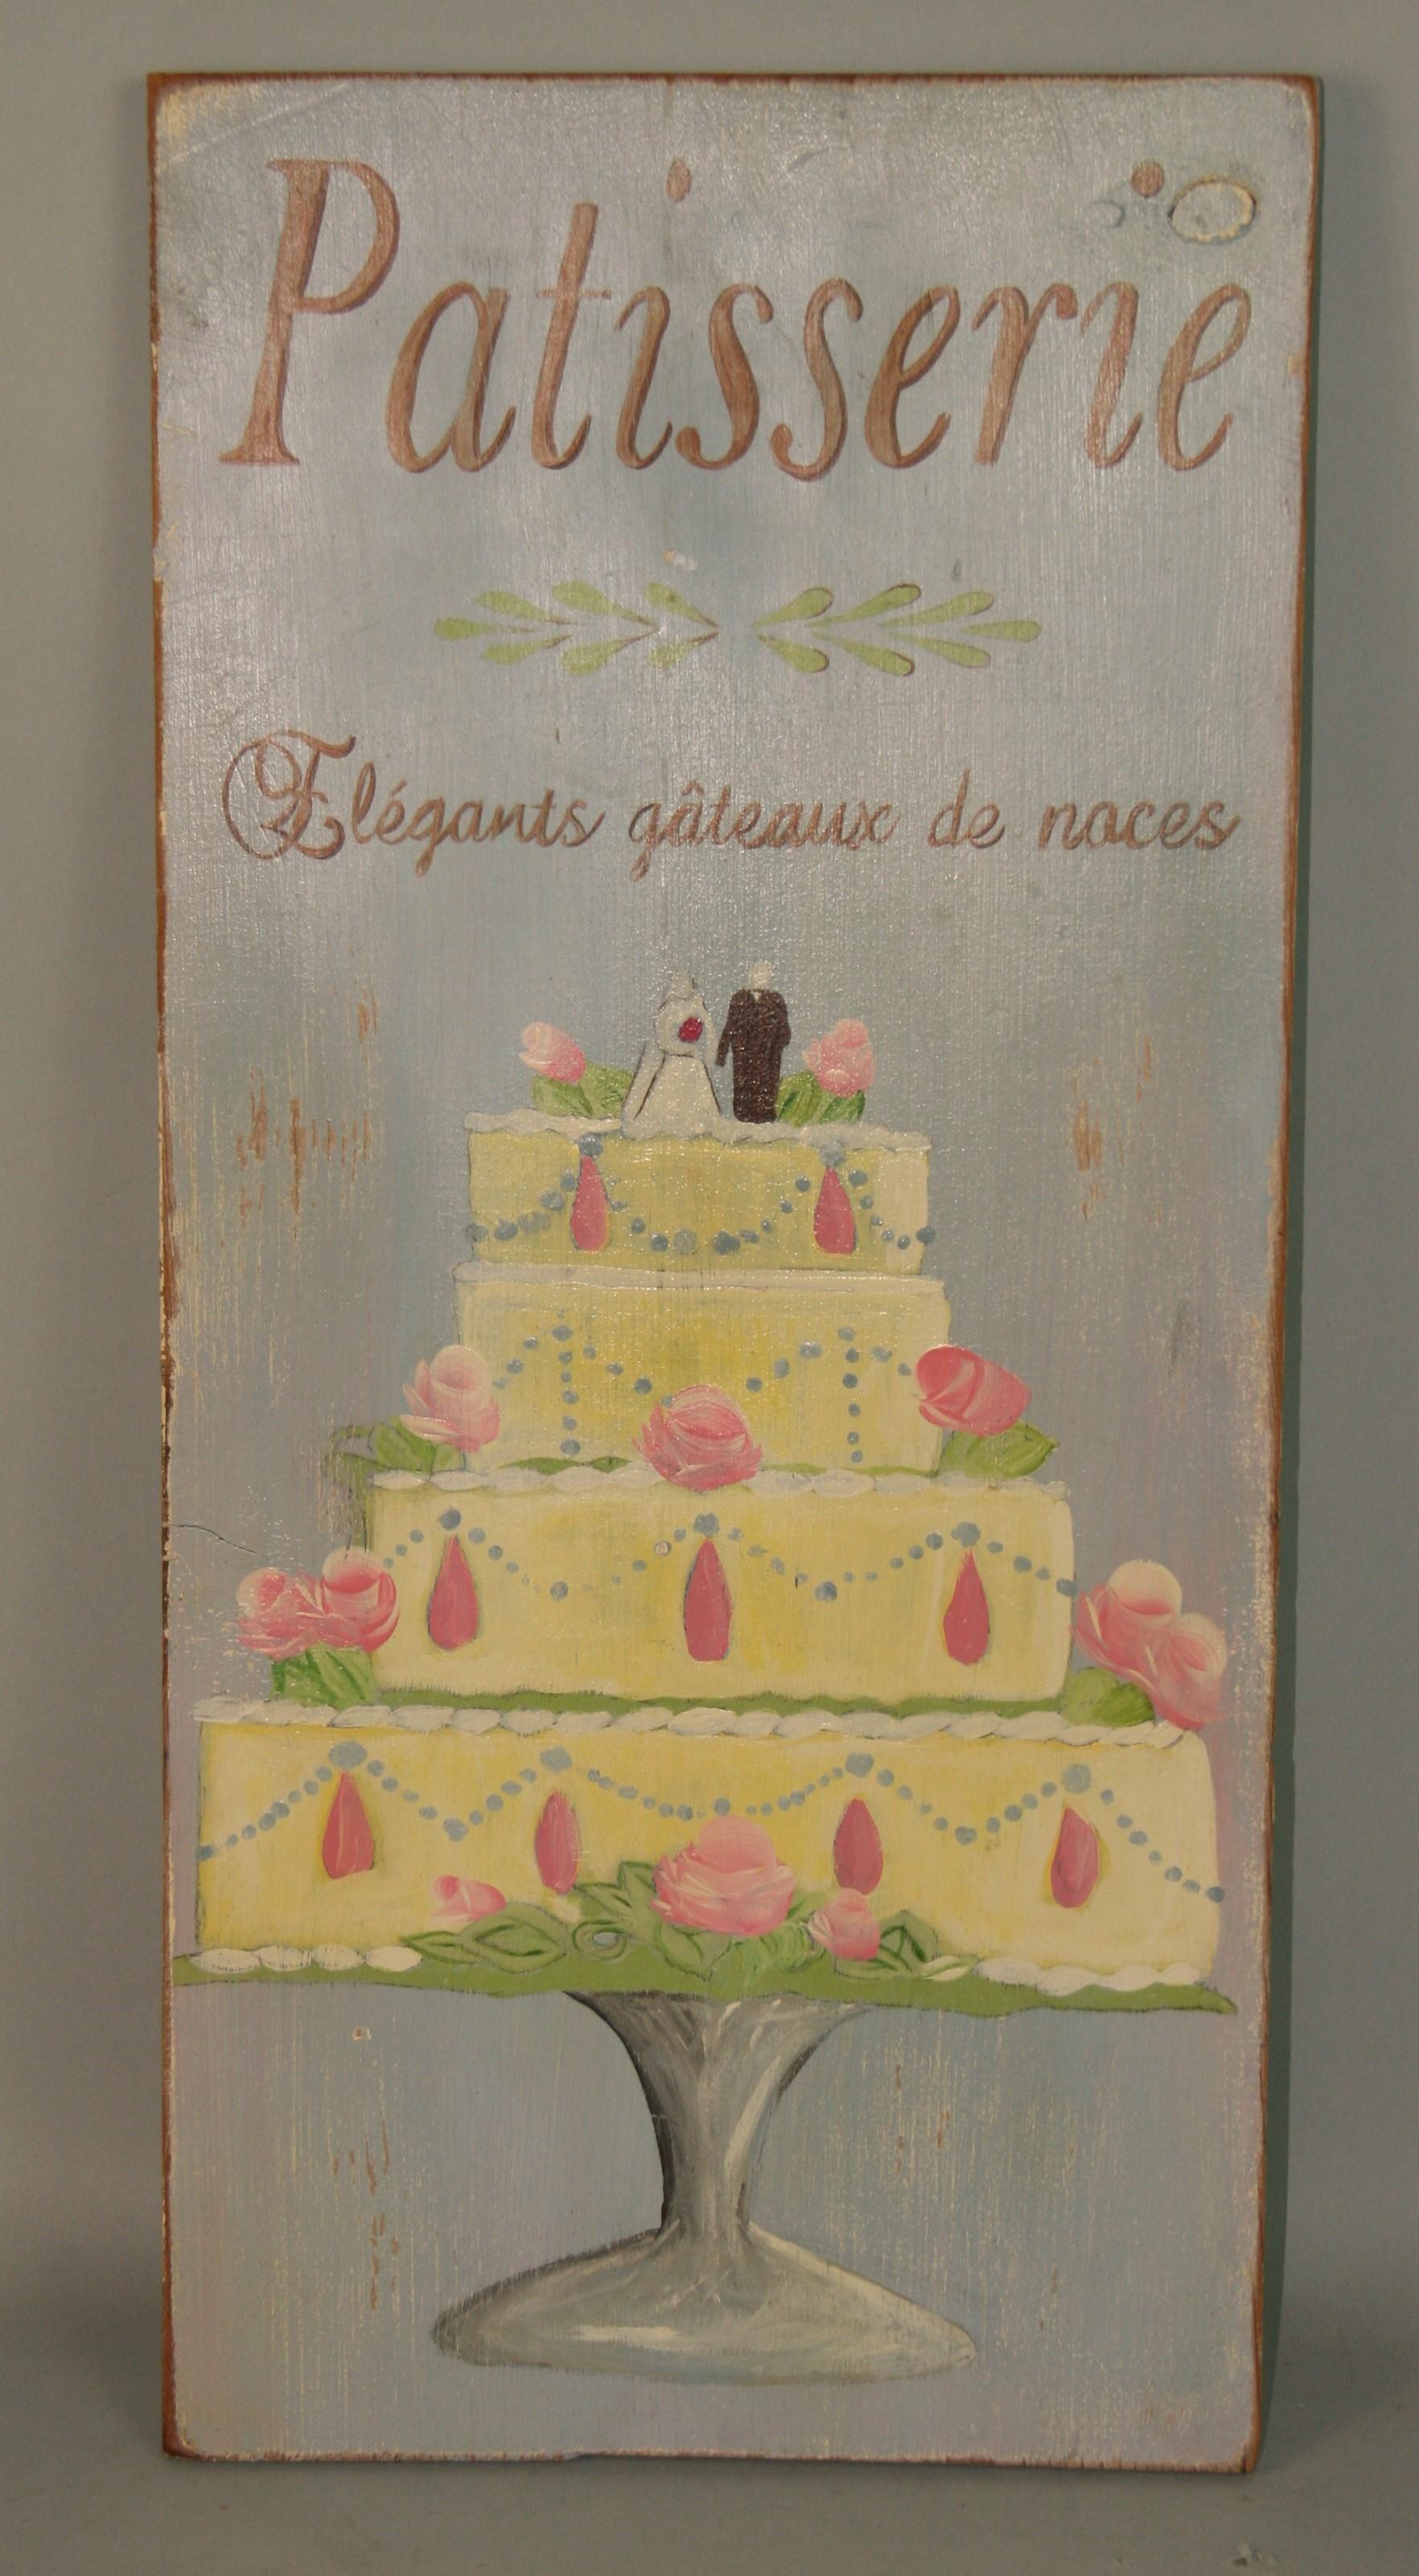 5028 French Patisserie wood panel with a wedding cake
Signed on verso 